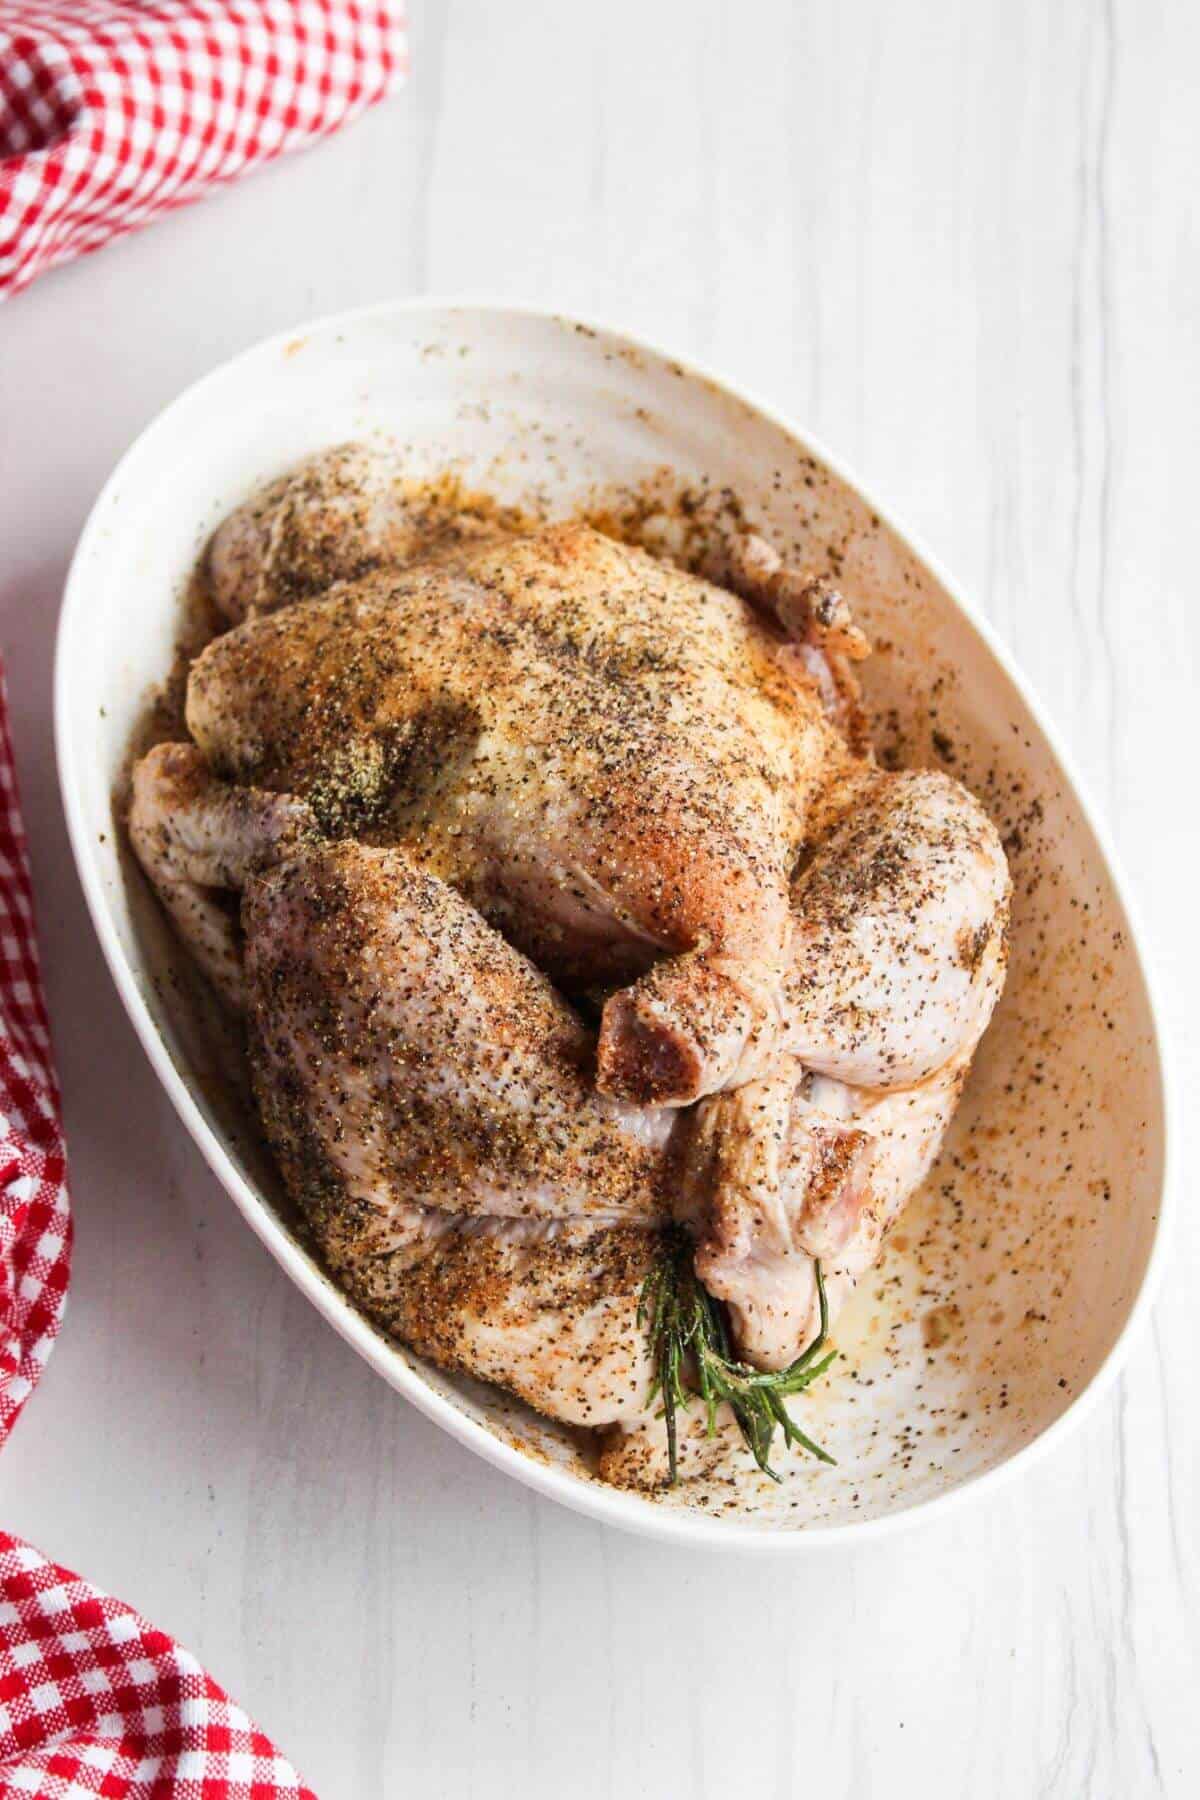 Whole chicken rubbed with seasoning in a white bowl on a white table.